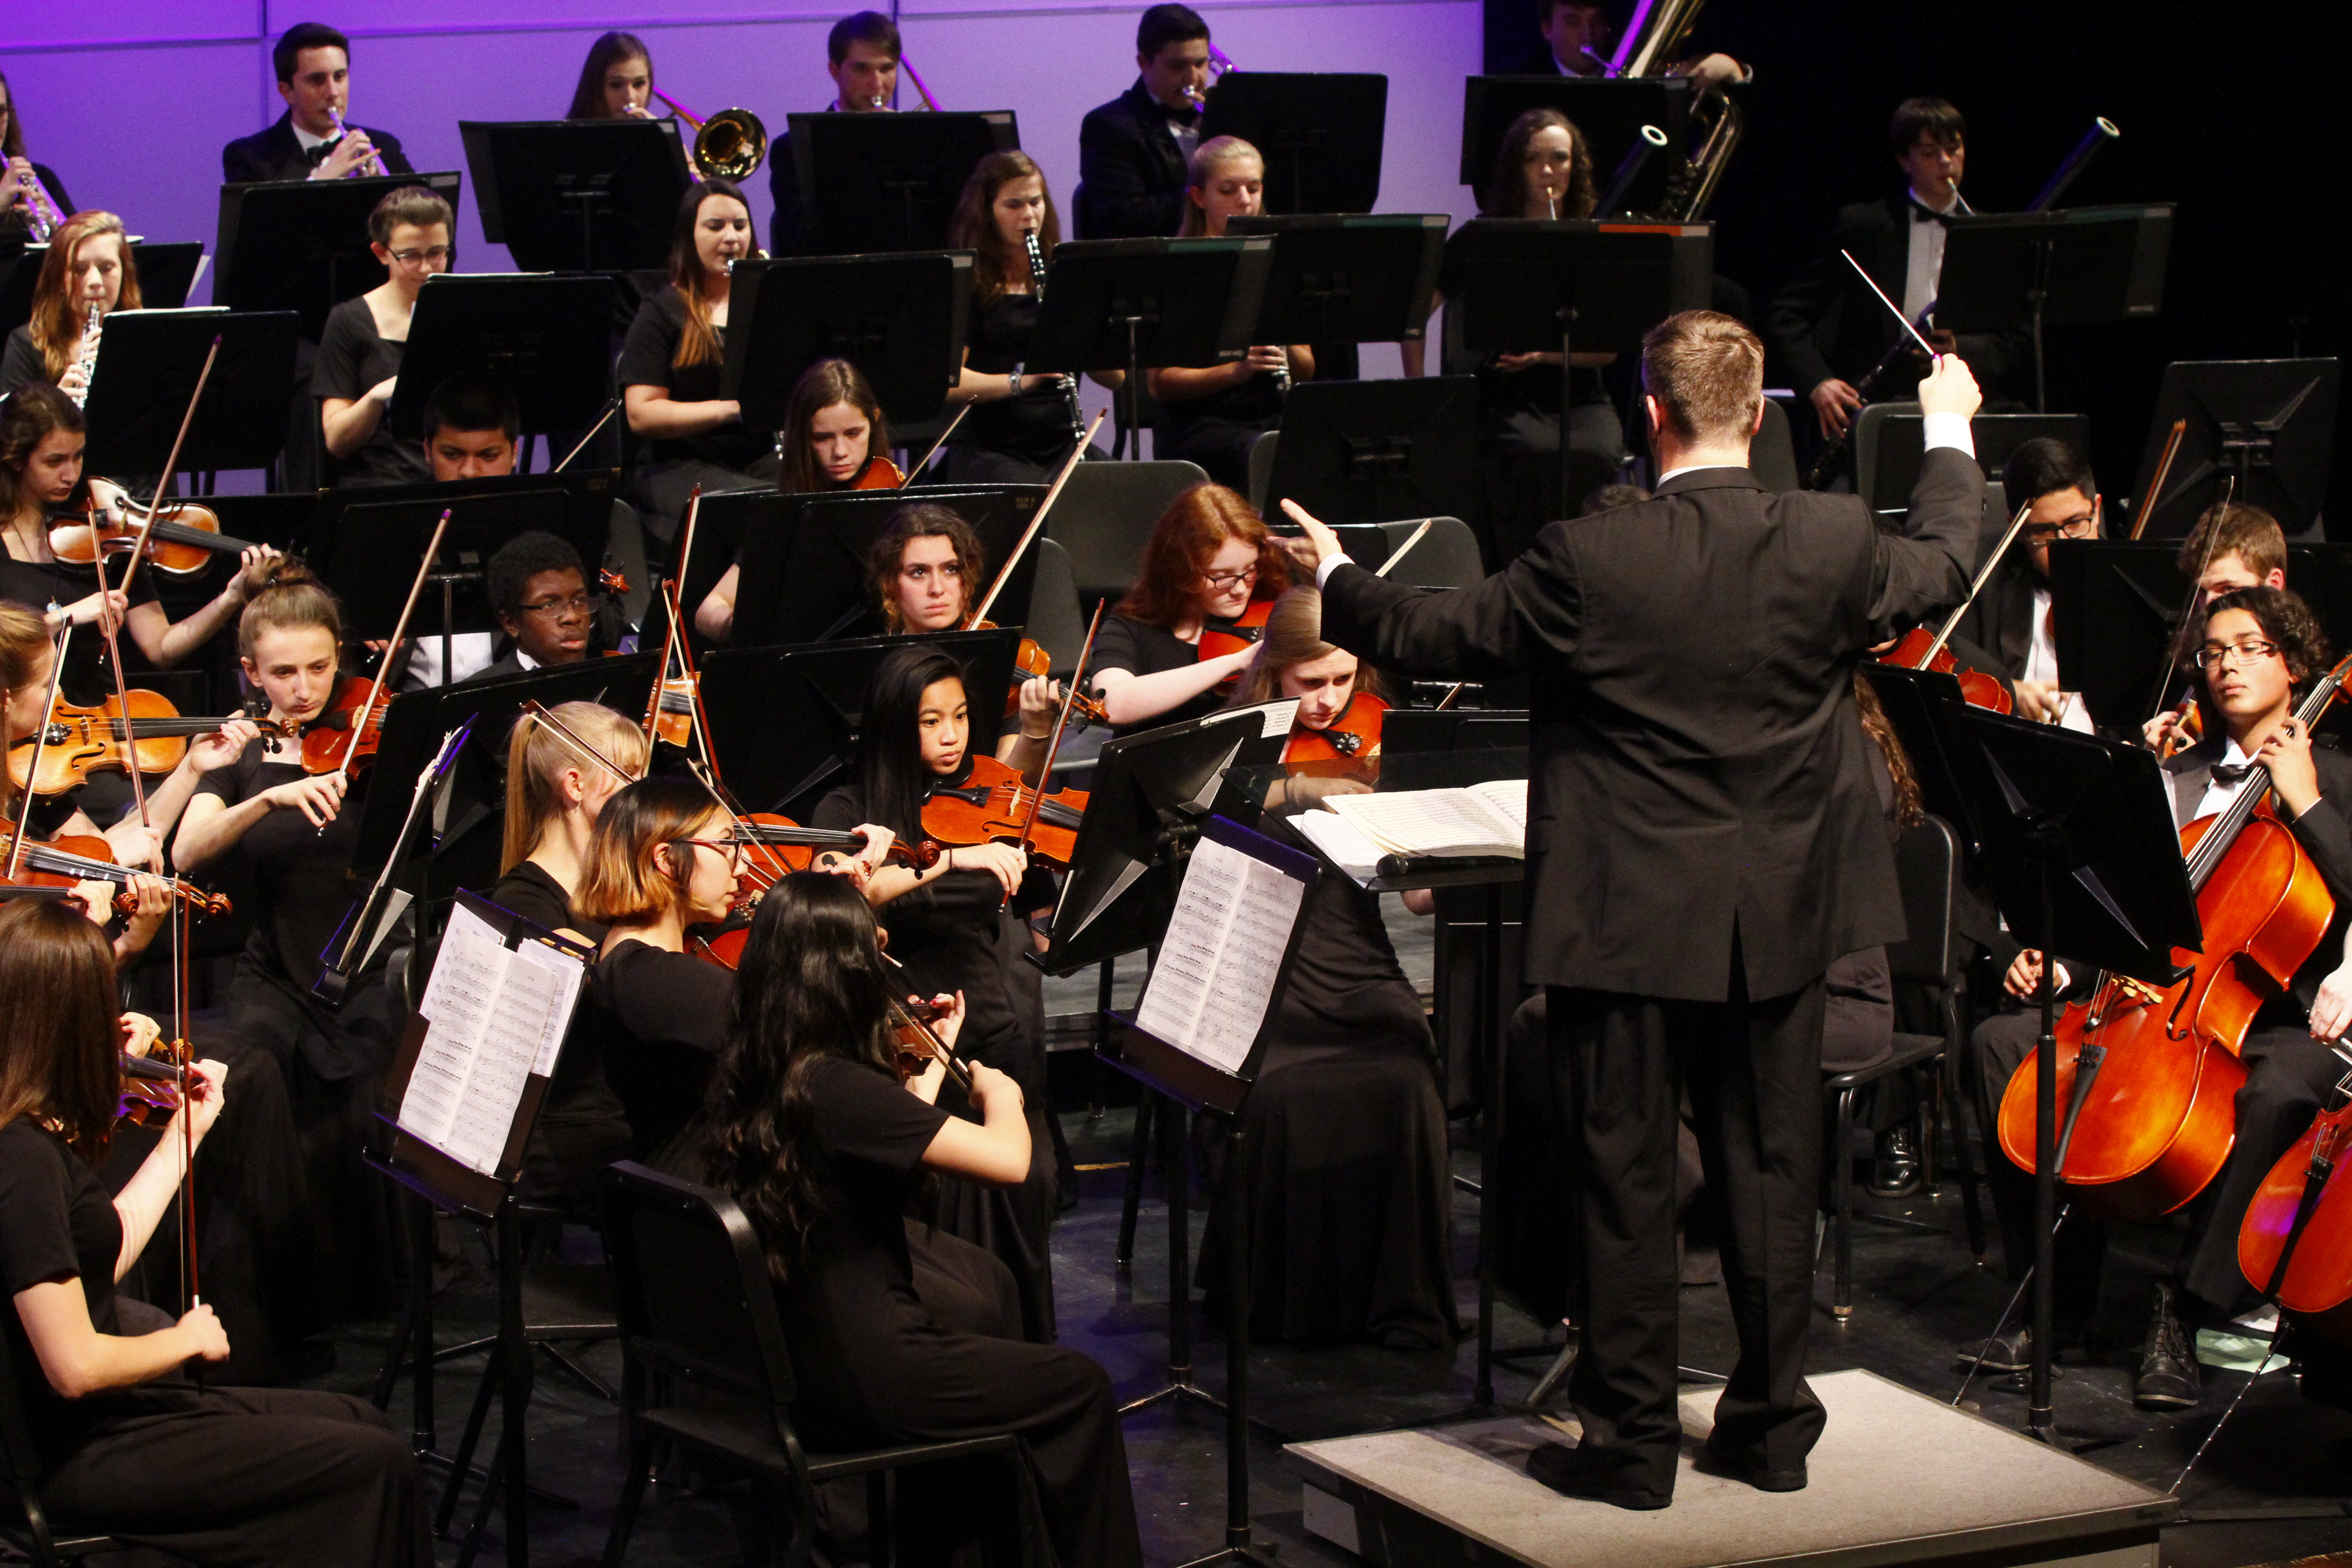 Rolling Meadows High School Music Department presents Music from the Land of Lincoln in Review